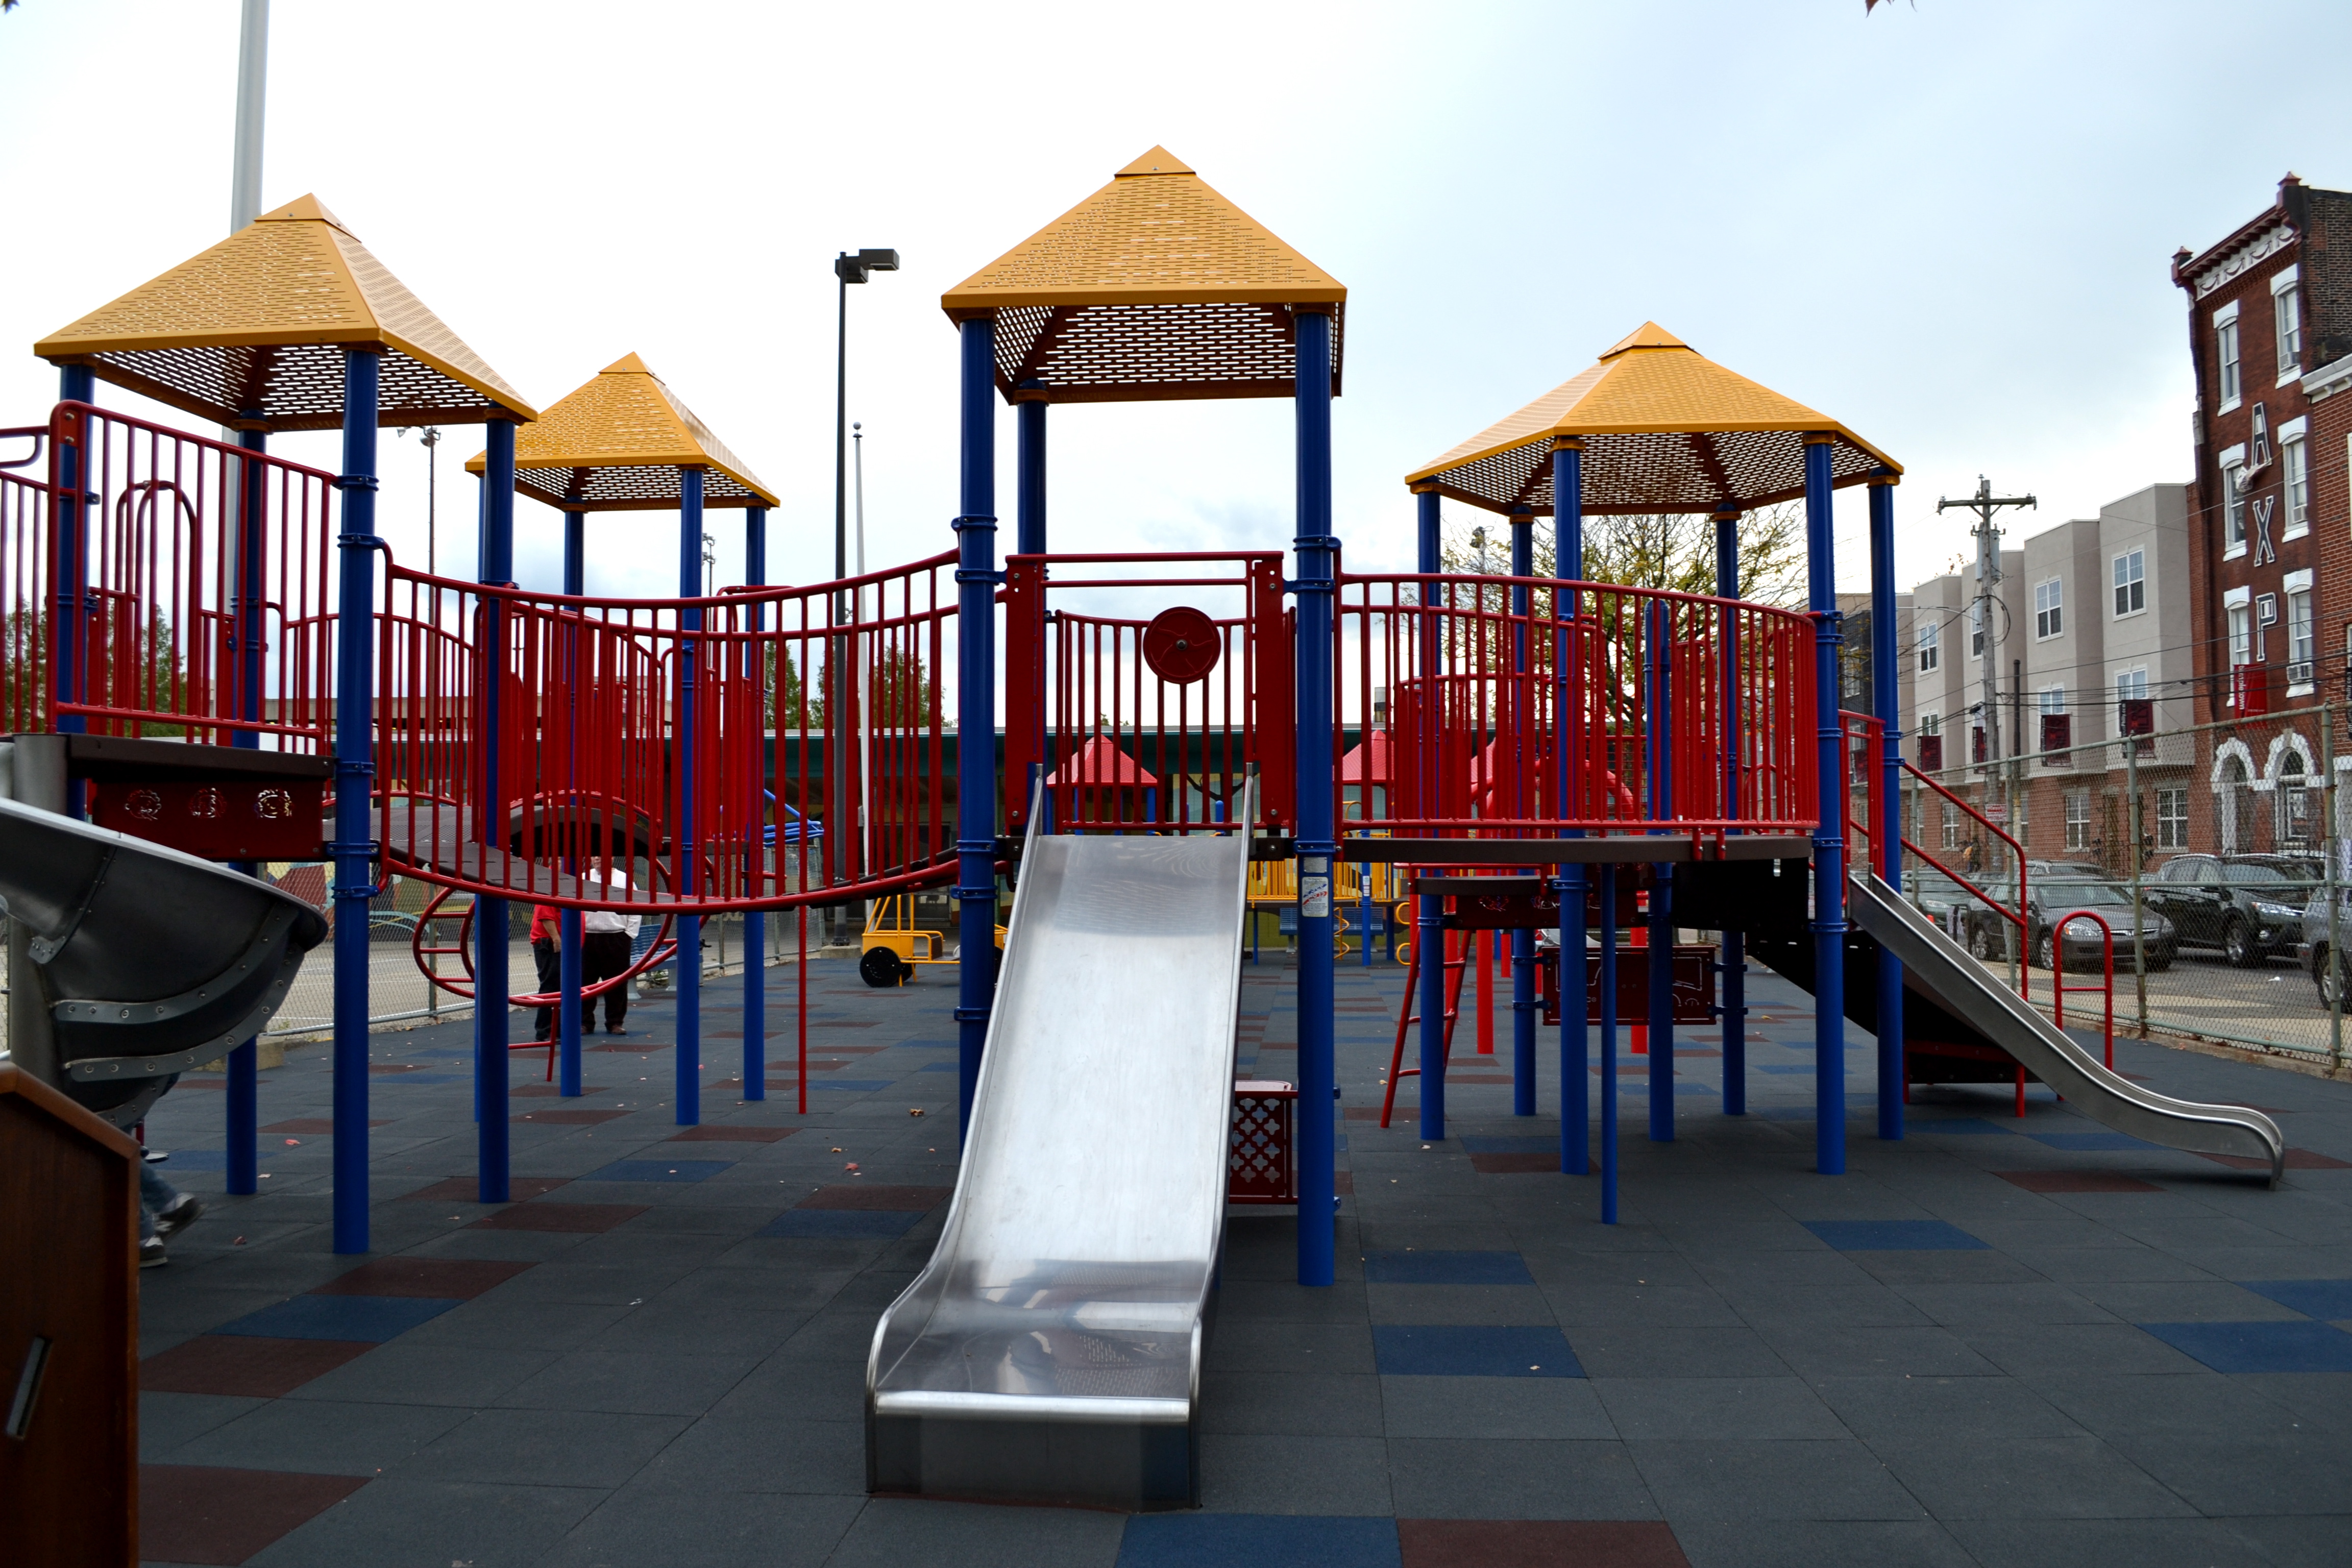 Philadelphia Parks and Recreation and Council President Clarke unveiled the newly renovated Amos Playground